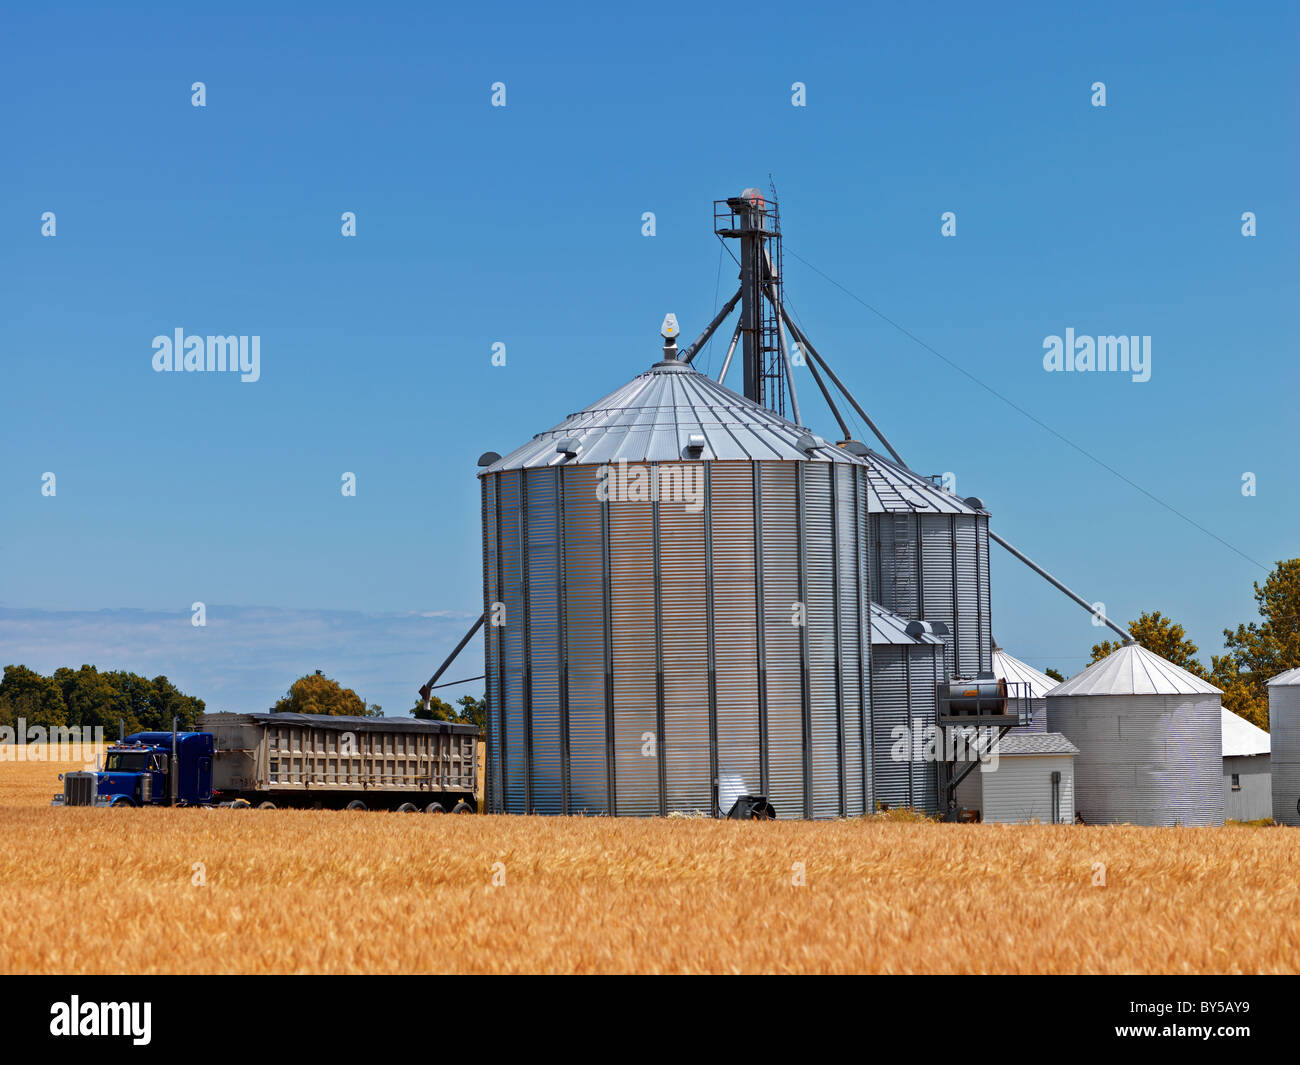 Canada,Ontario,Vineland, grain silos and wheat field with transport truck Stock Photo